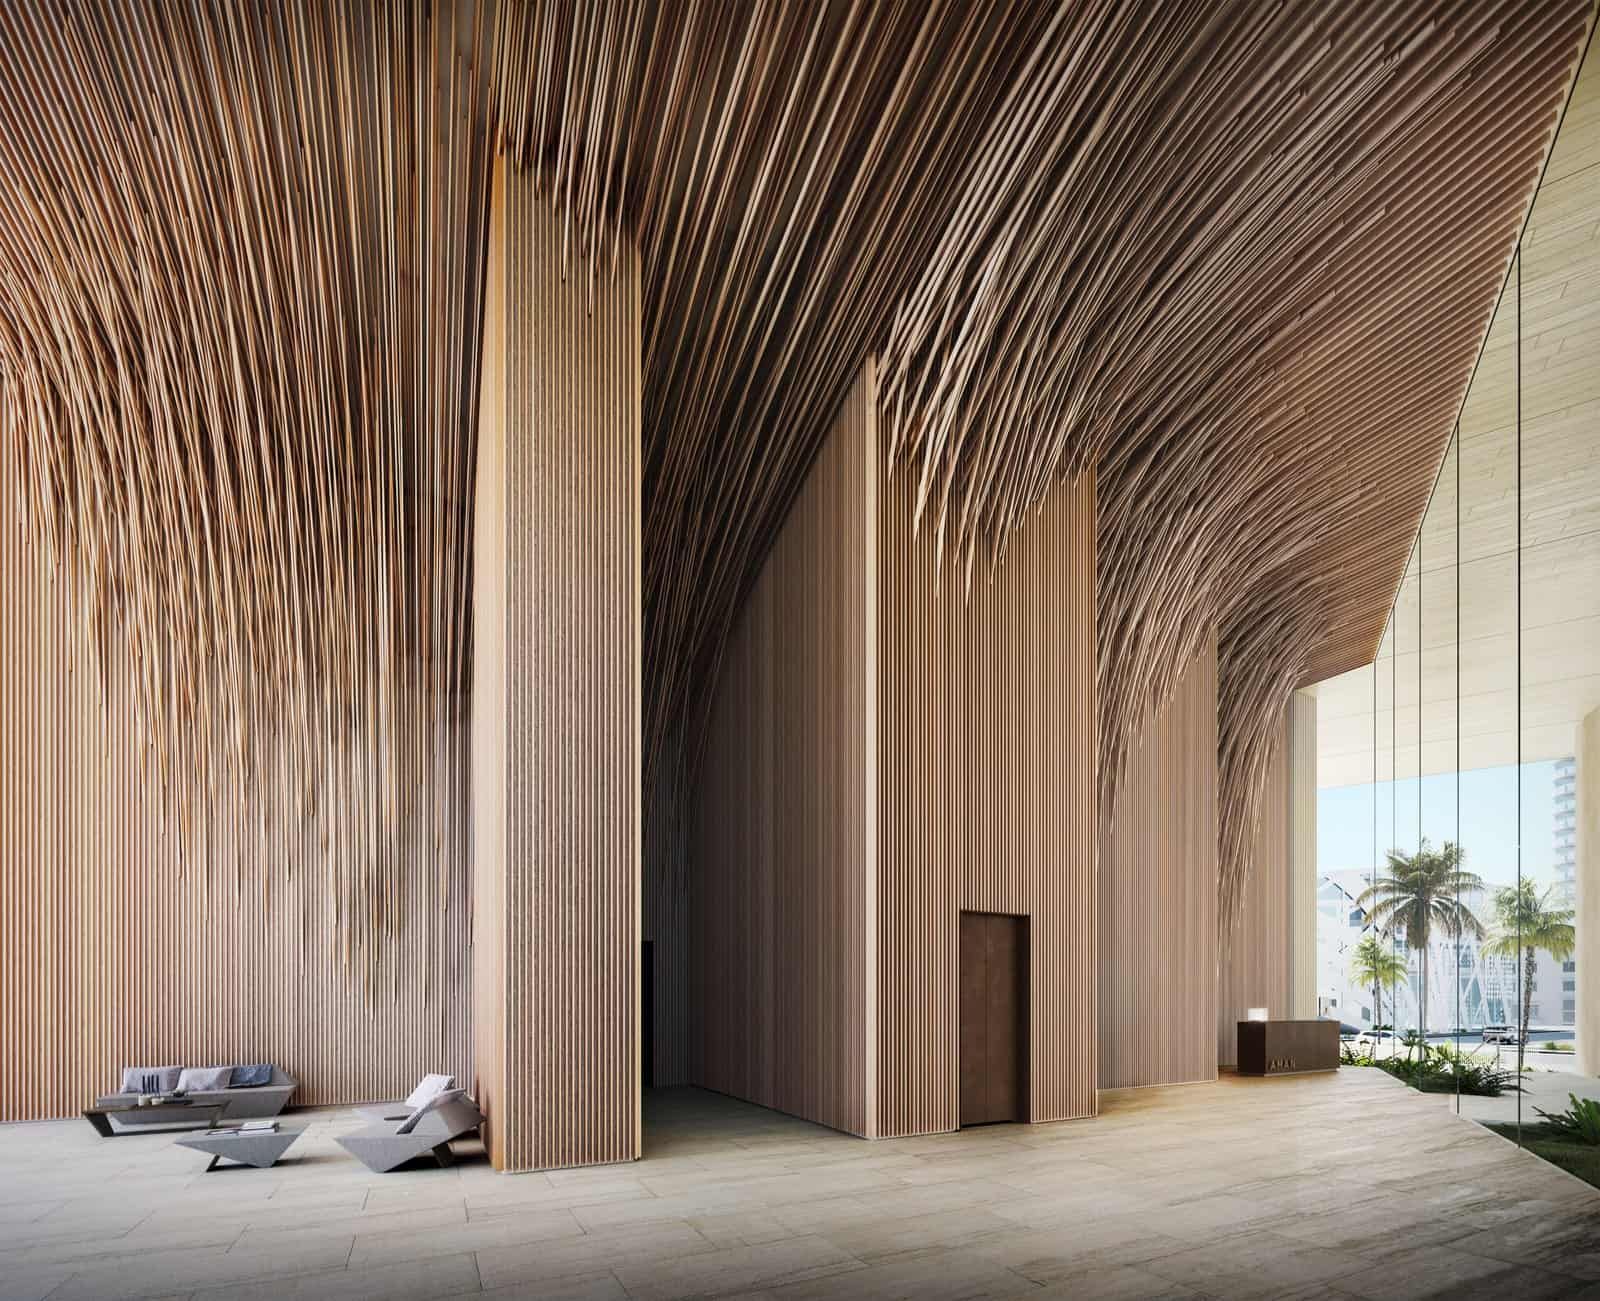 Vertical atrium space with wooden parametric wall design detail